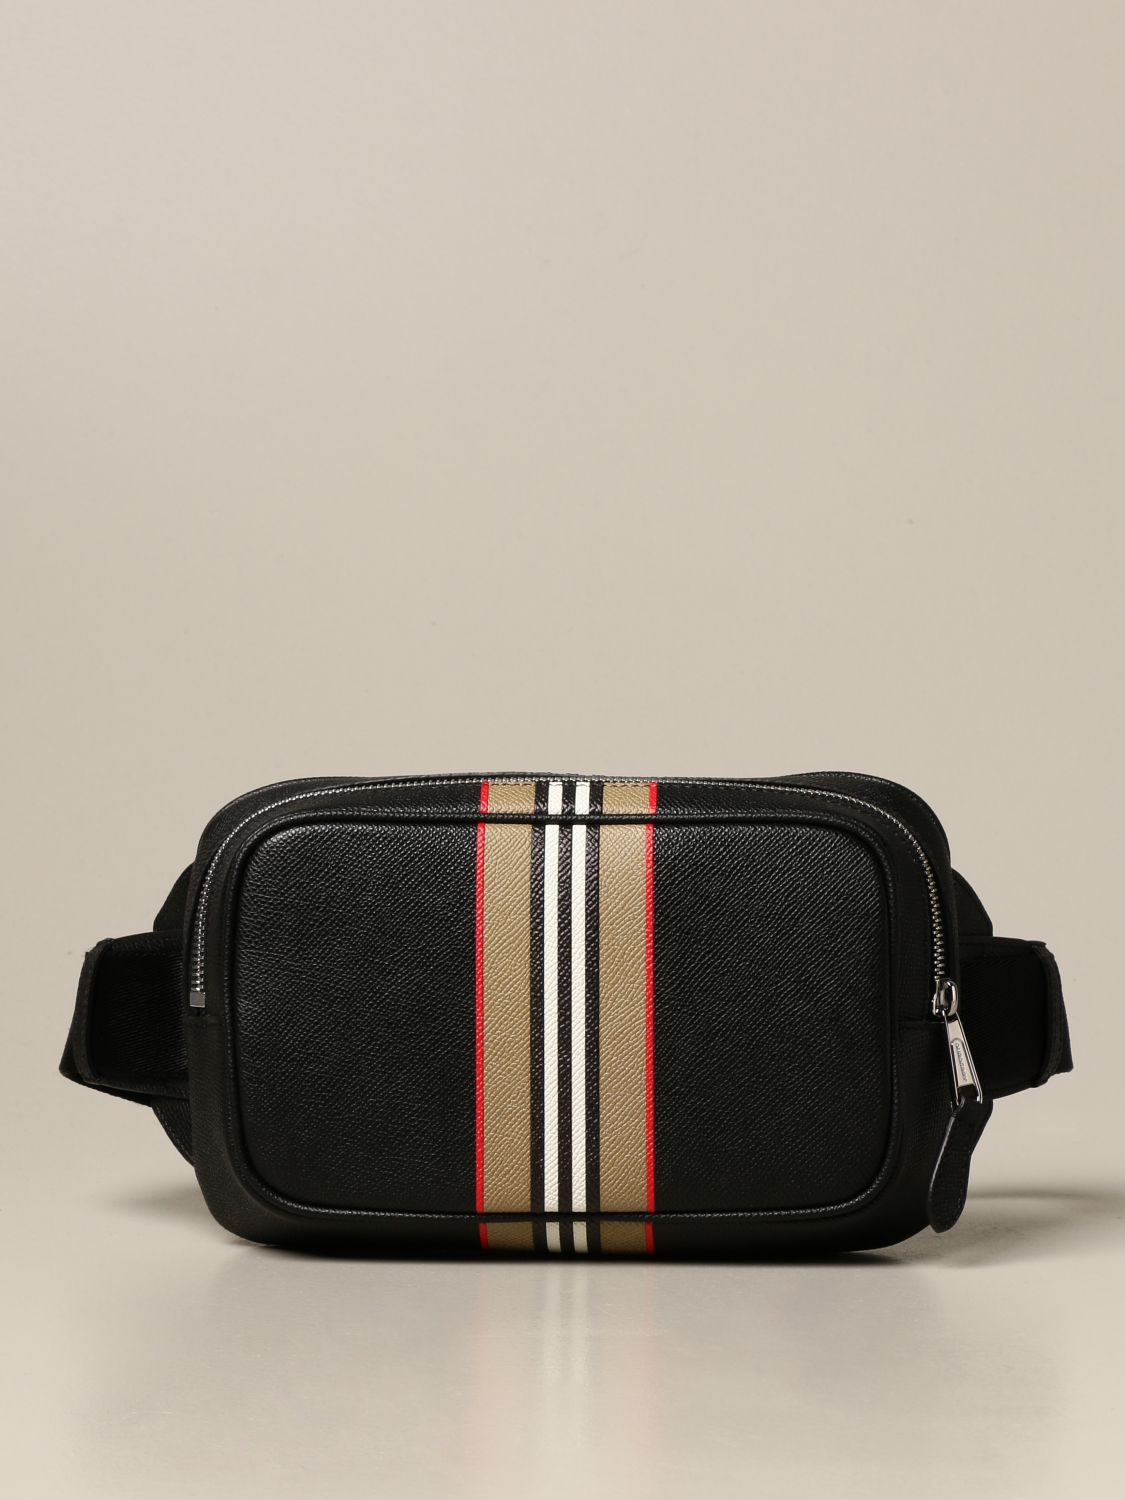 Burberry belt bag in grained leather with striped print